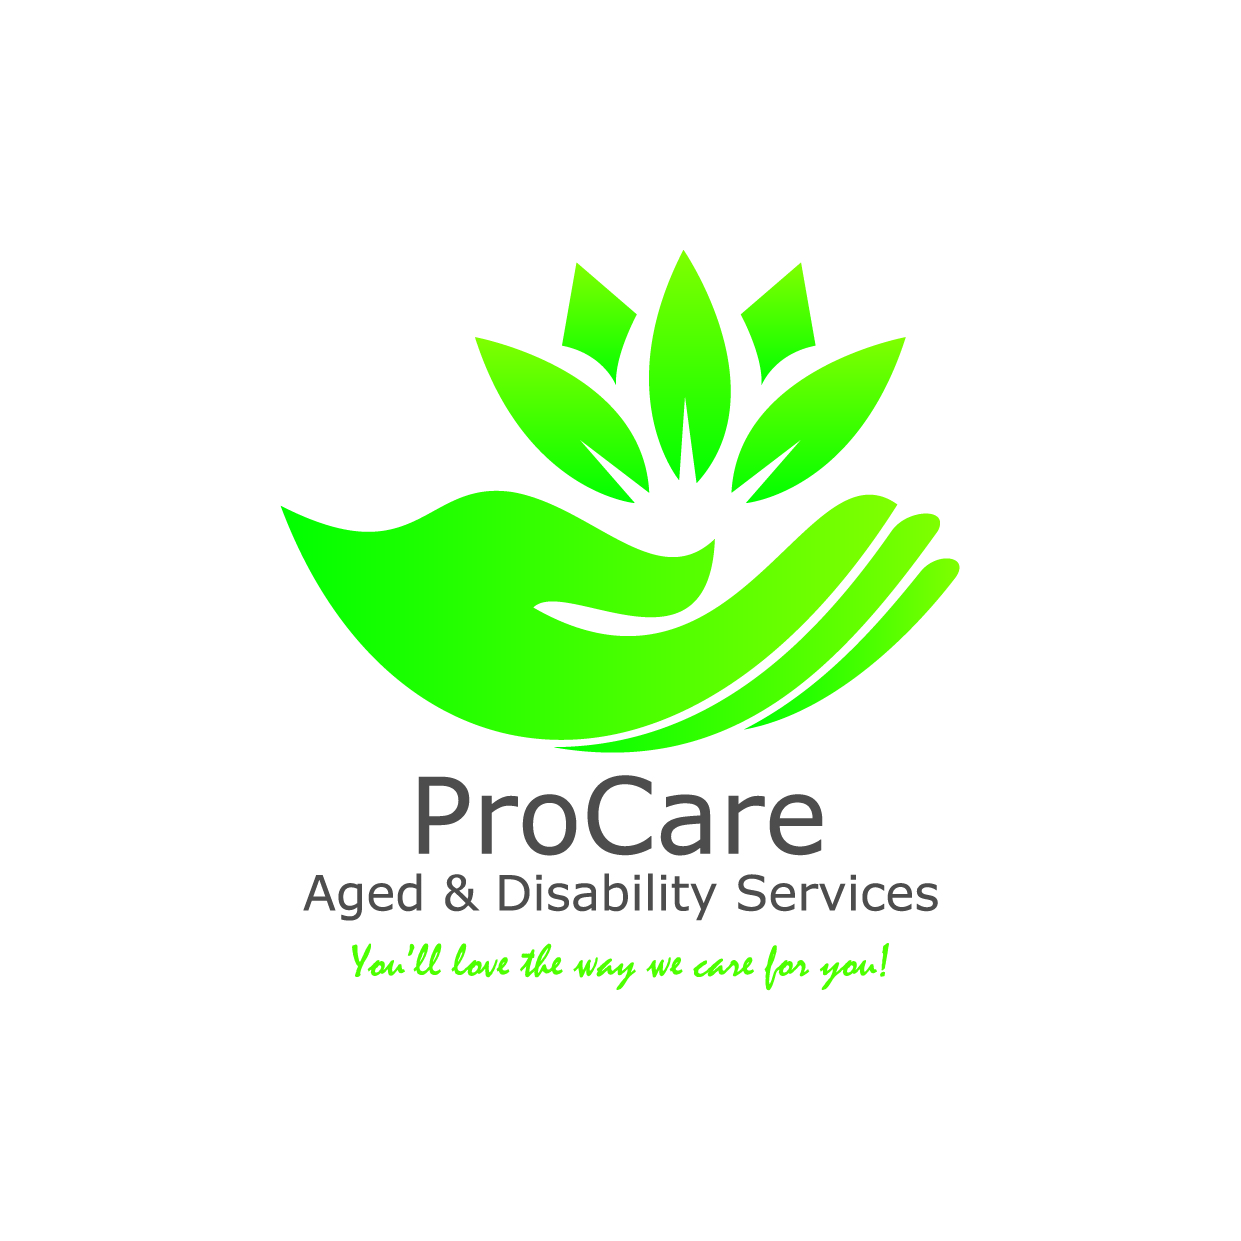 Procare-Aged-Disability-Services-Final-Logo